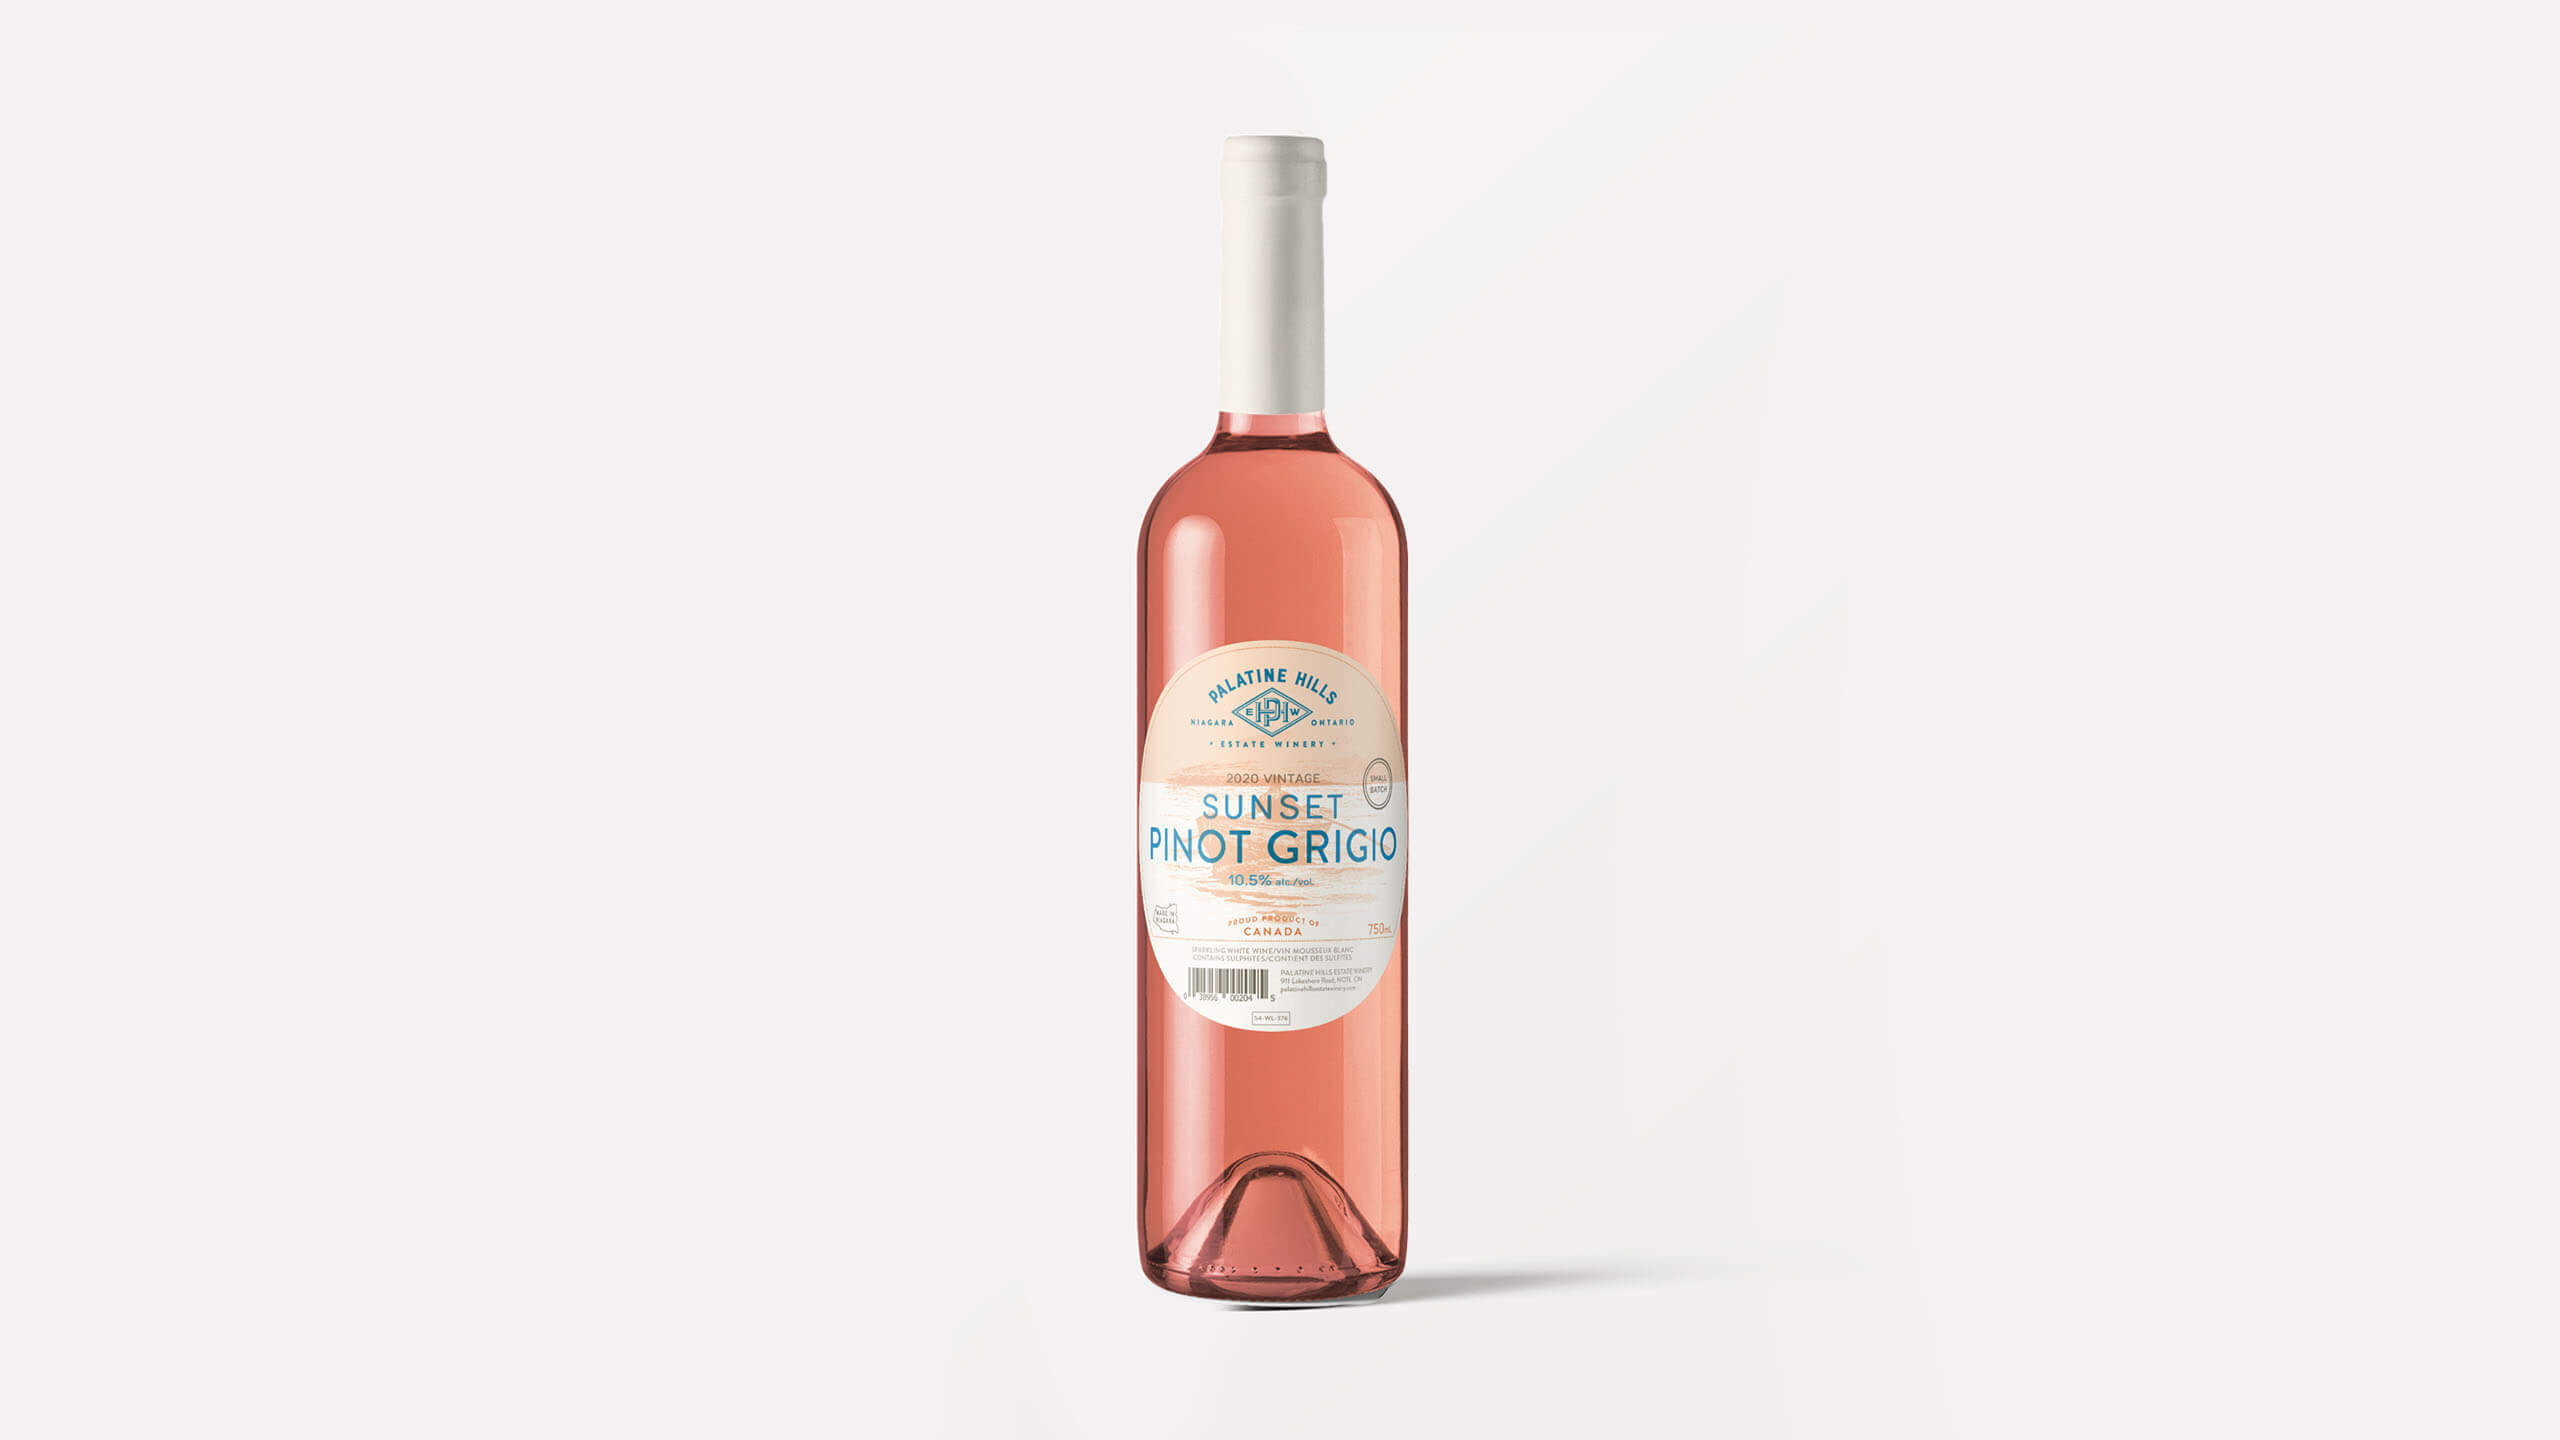 Sunset Pinot Grigio label design by The Coopers